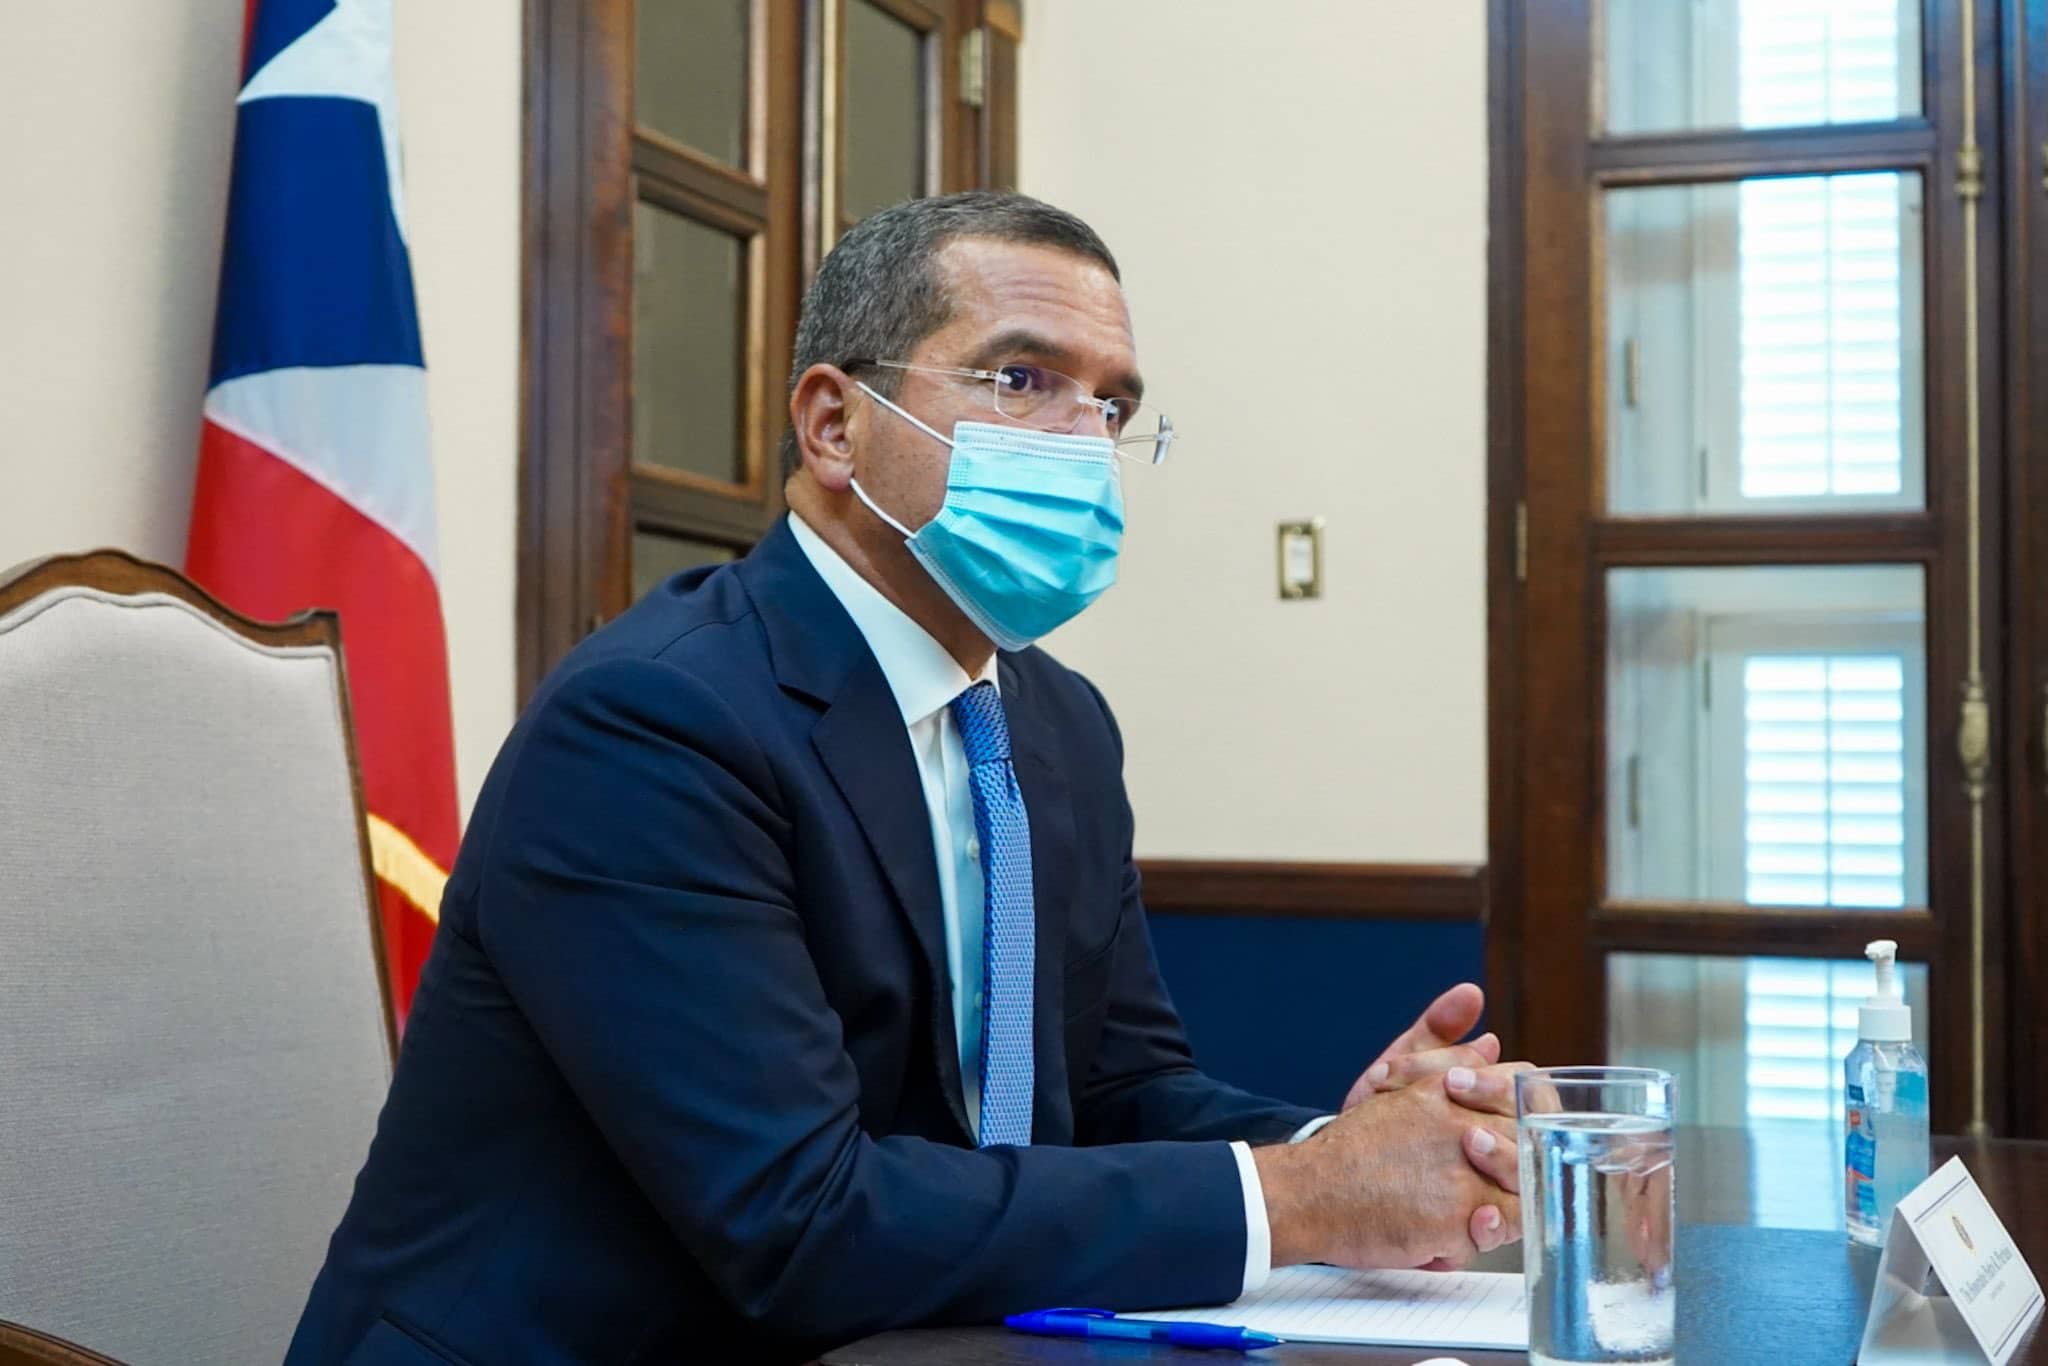 Puerto Rico sets the example in COVID-19 vaccine regulations